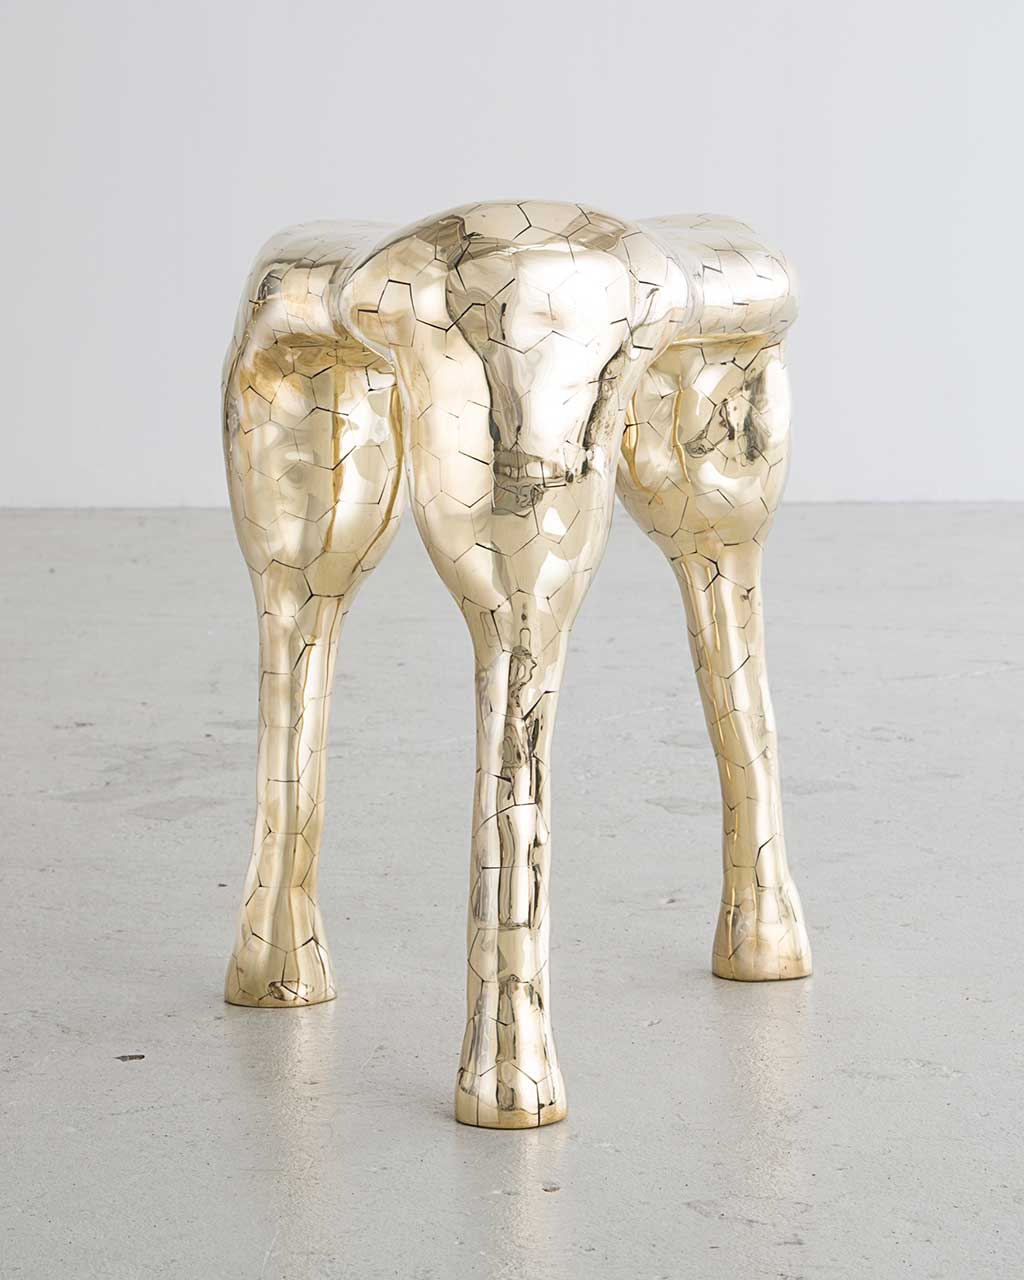 The Haas Brothers, Unique Hex Stool, 2012